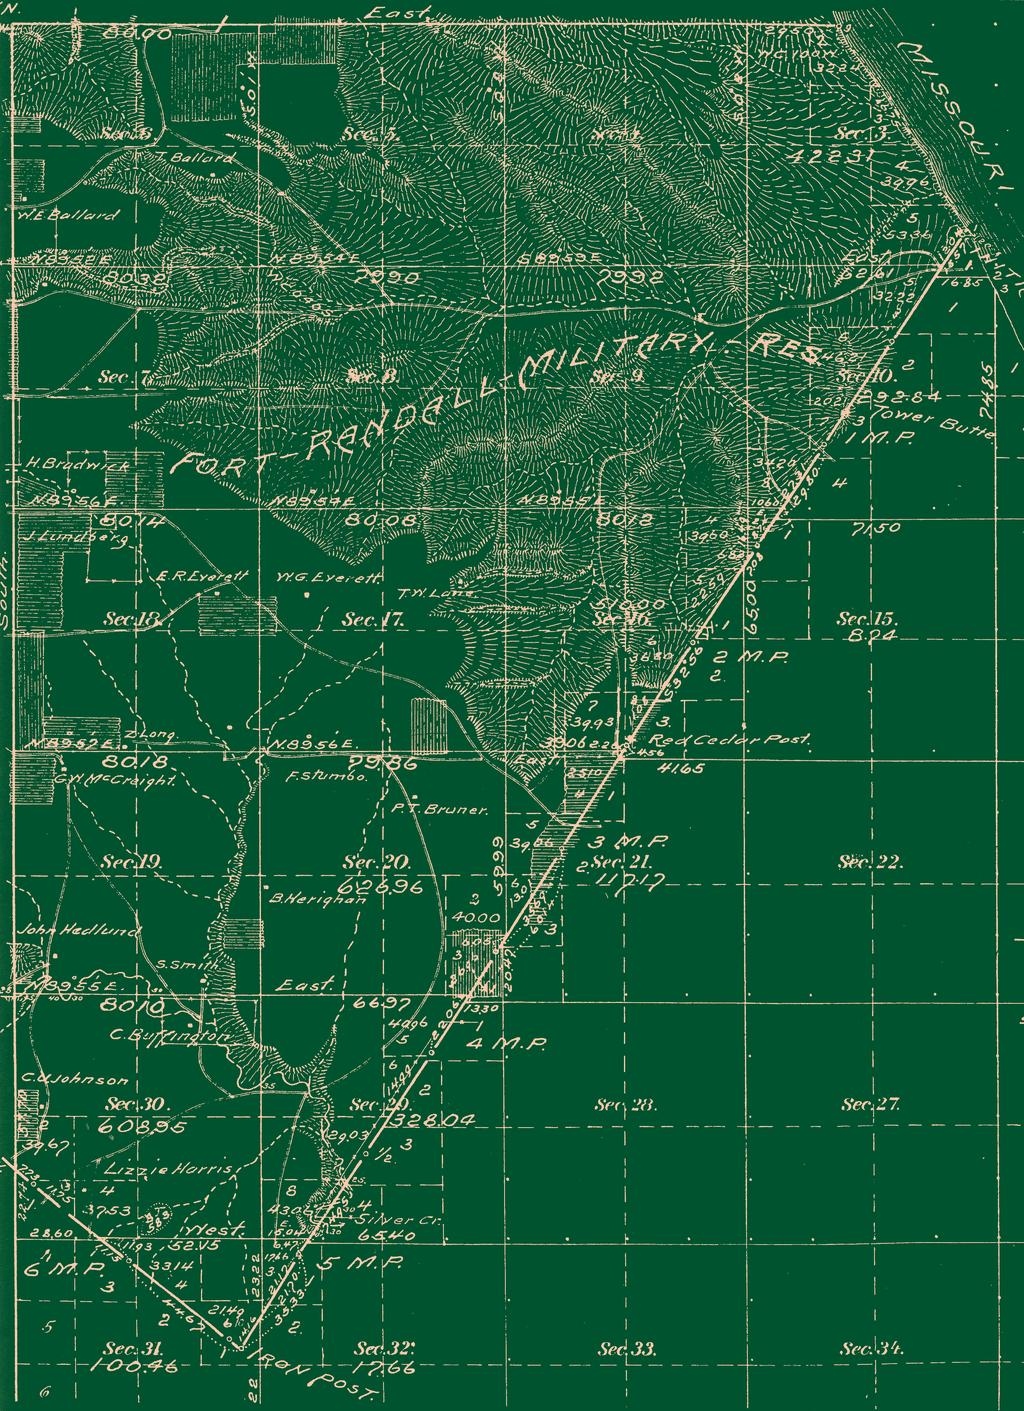 GLO Map: The Fort Randall Military Reservation was closed in 1892, which made it open for settlement. When U.S.